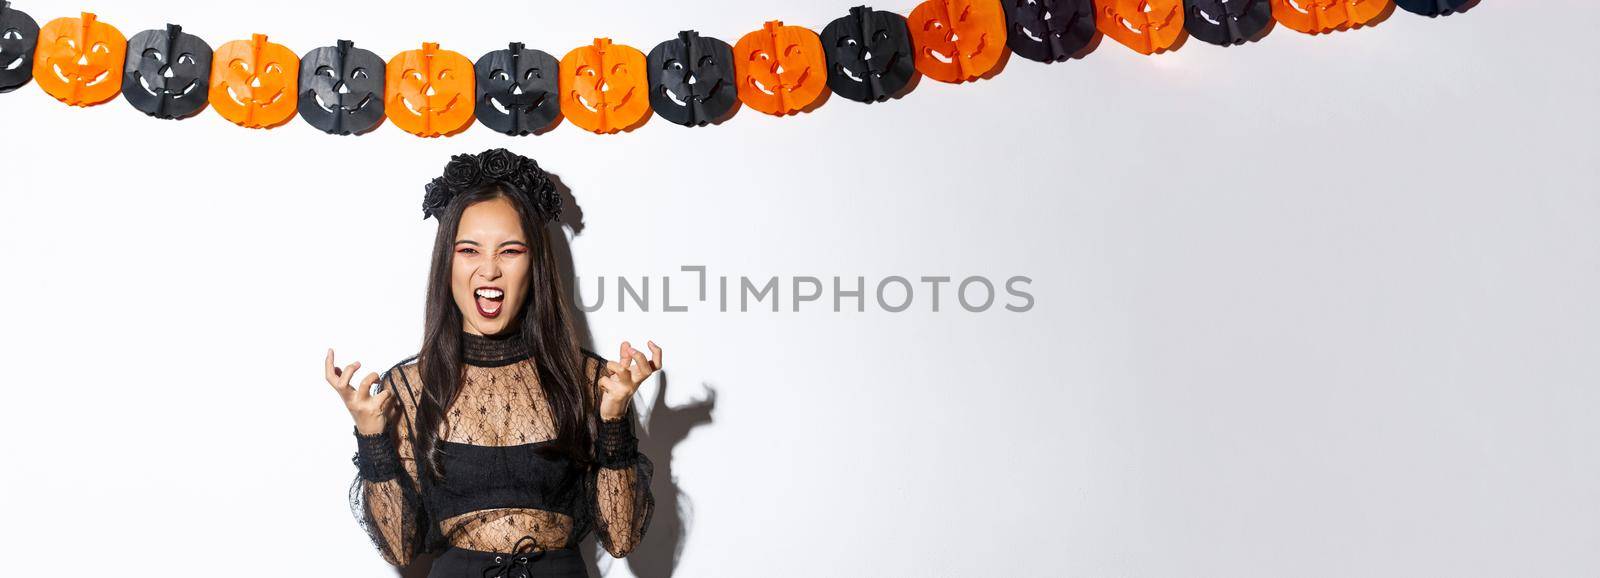 Image of wicked witch laughing evil and grimacing, woman celebrating halloween against party decorations, standing over pumpkin streamers.